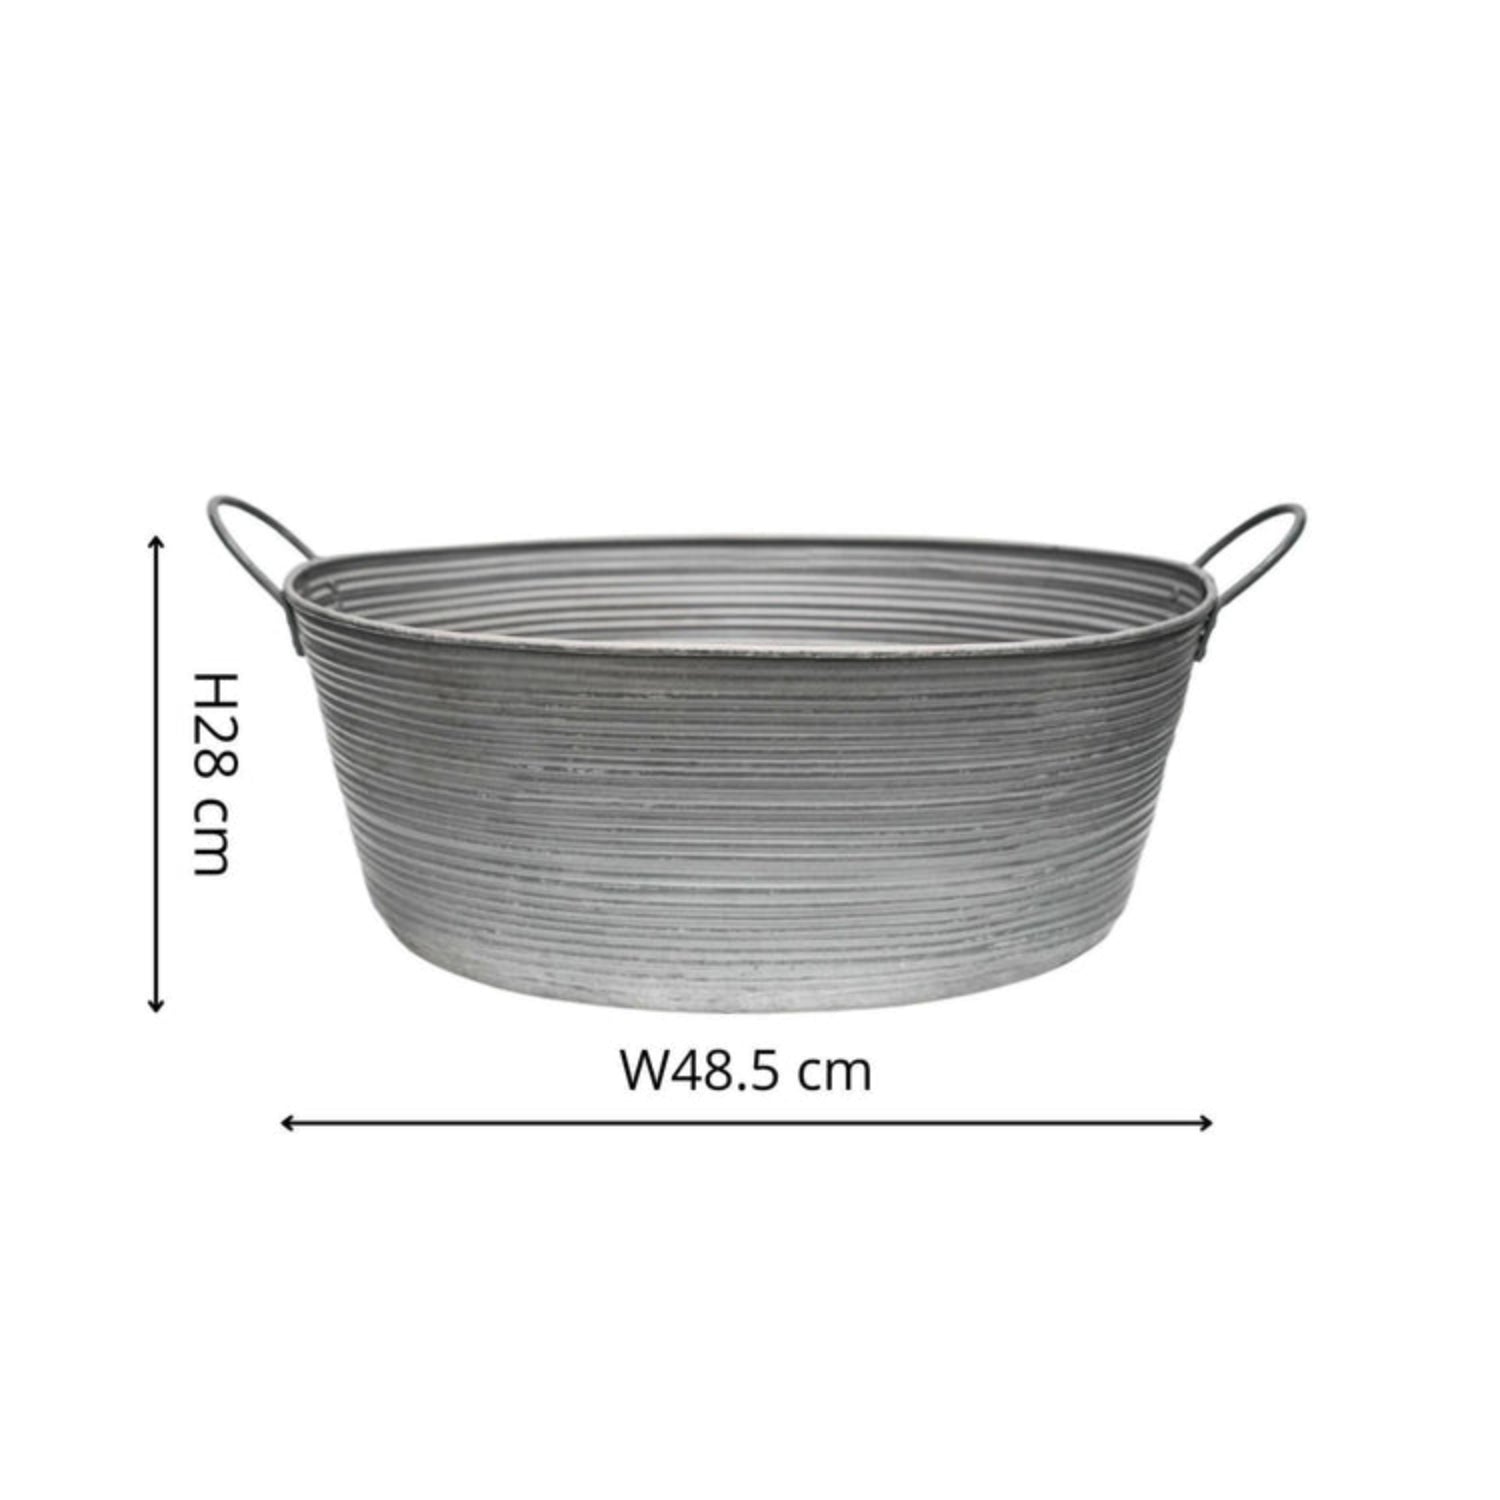 Outdoor Matlock Oval Planter with Handles